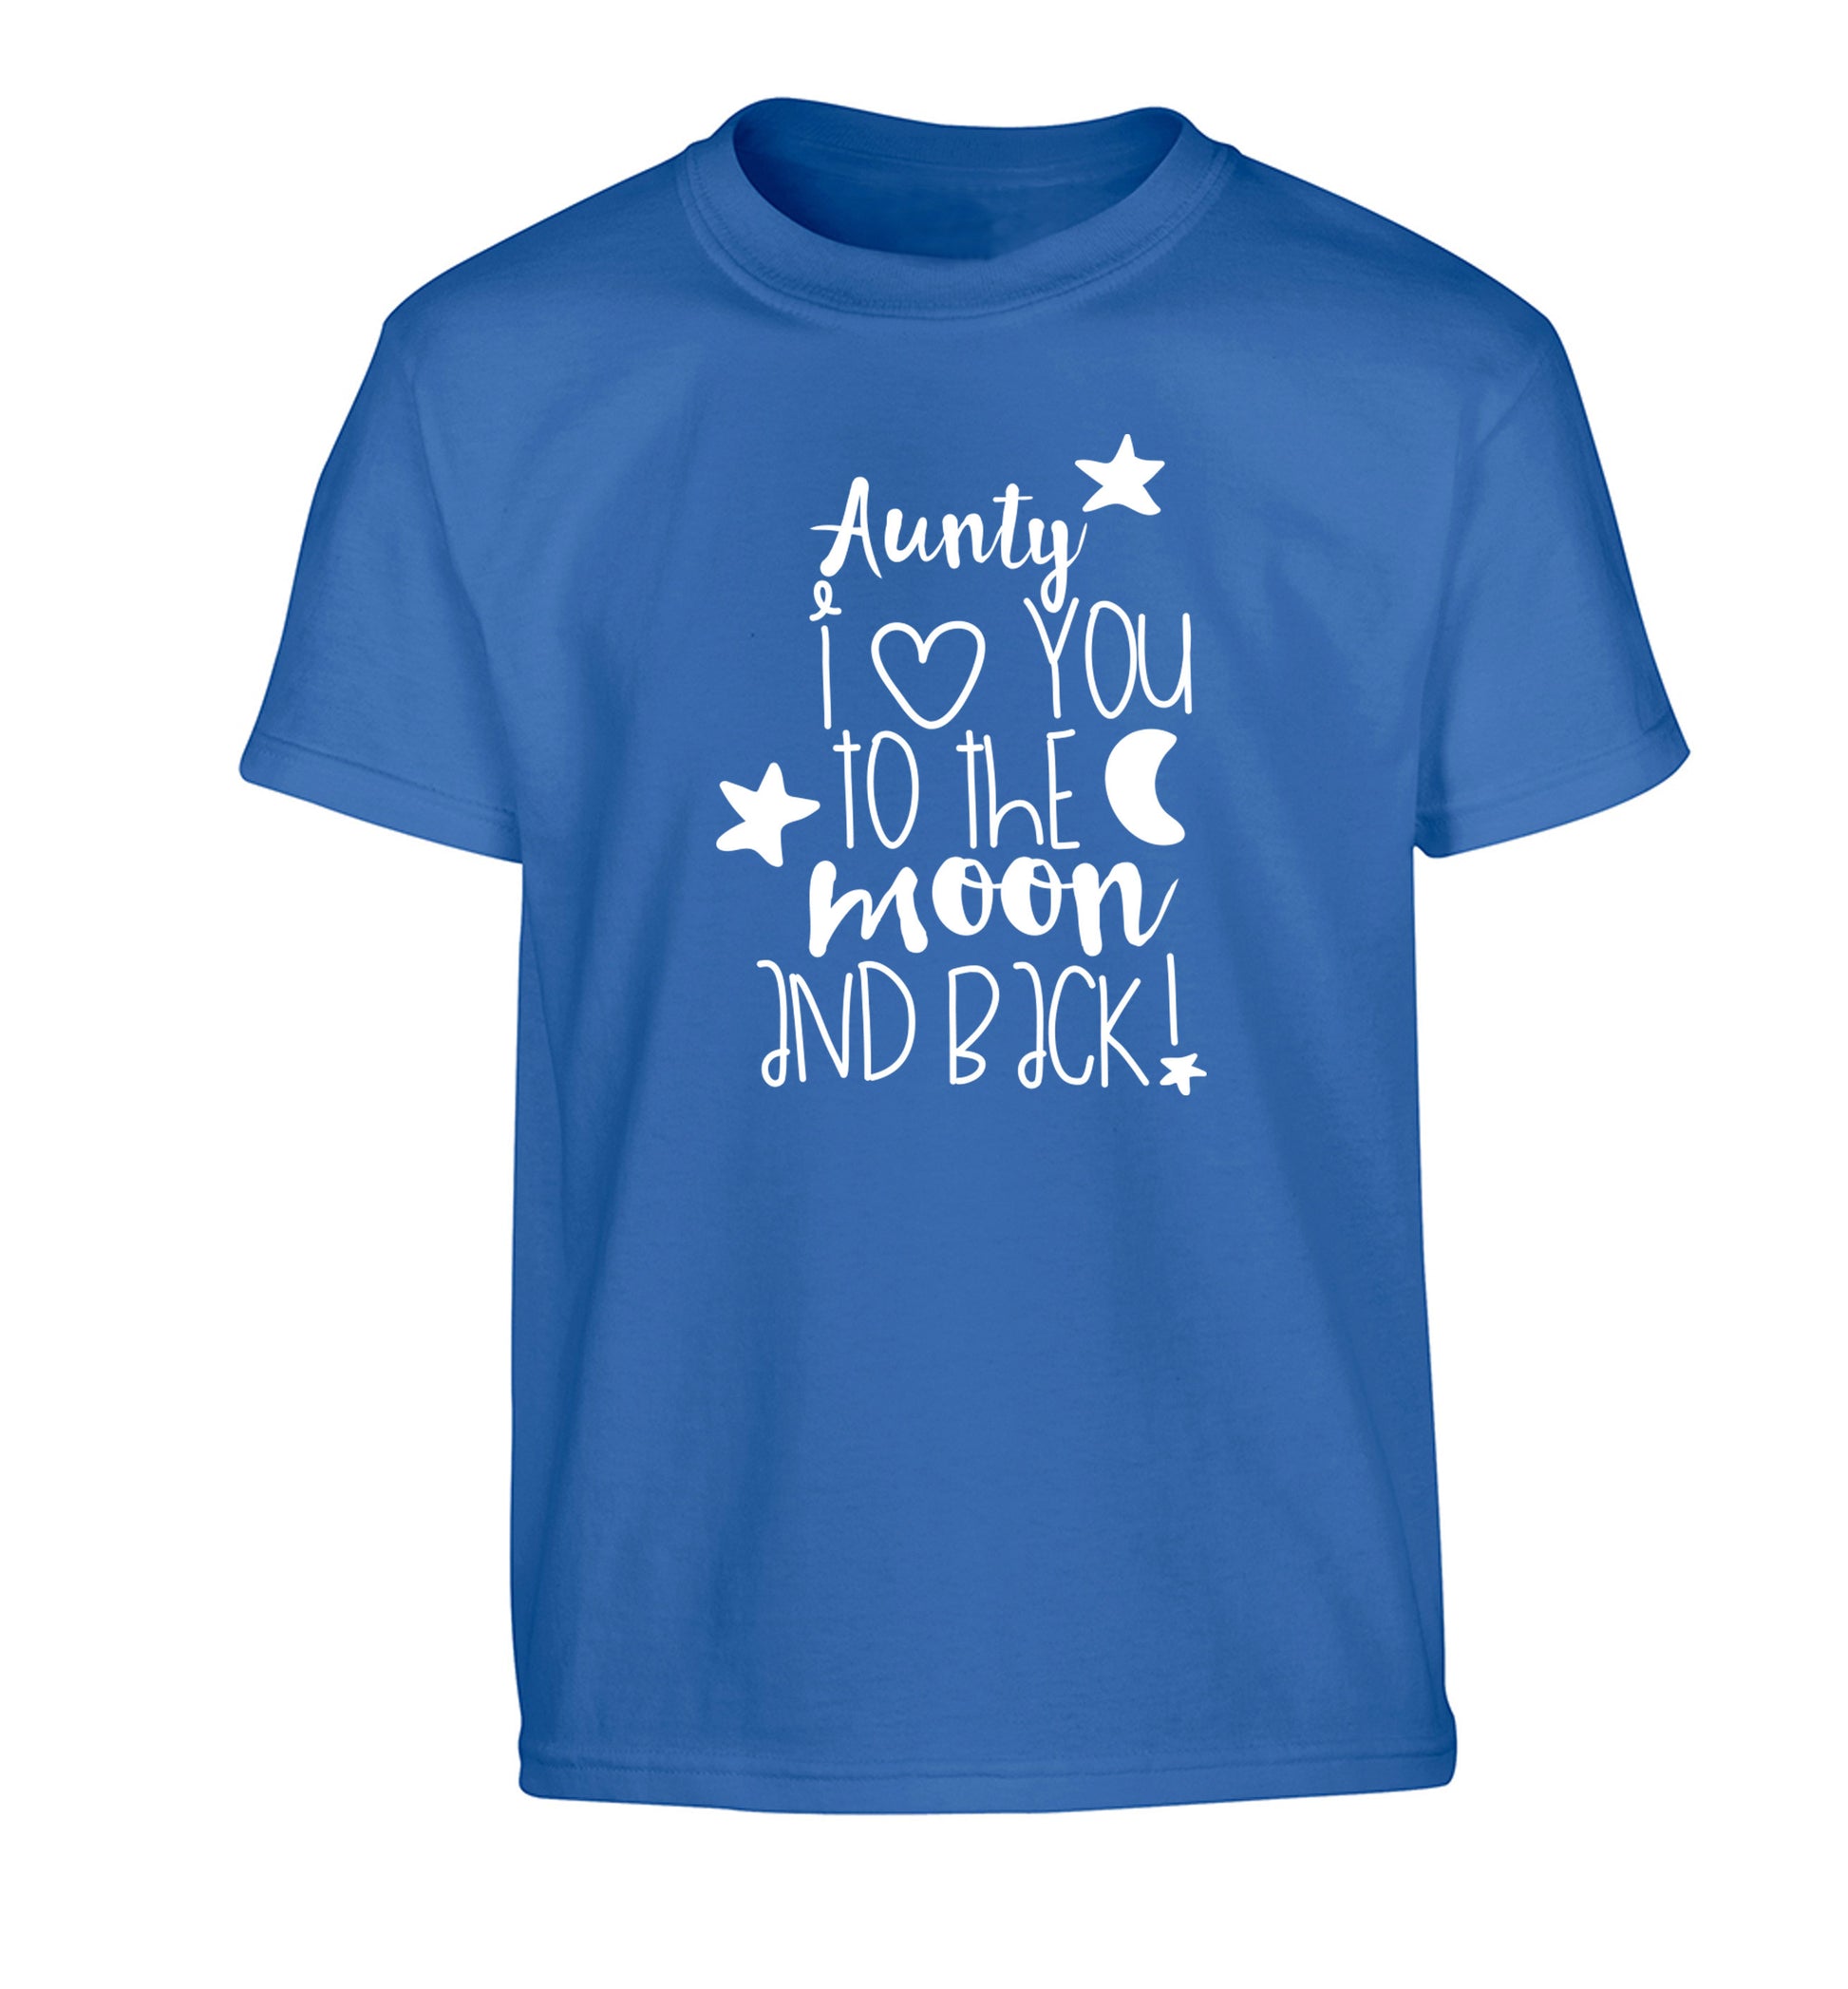 Aunty I love you to the moon and back Children's blue Tshirt 12-14 Years